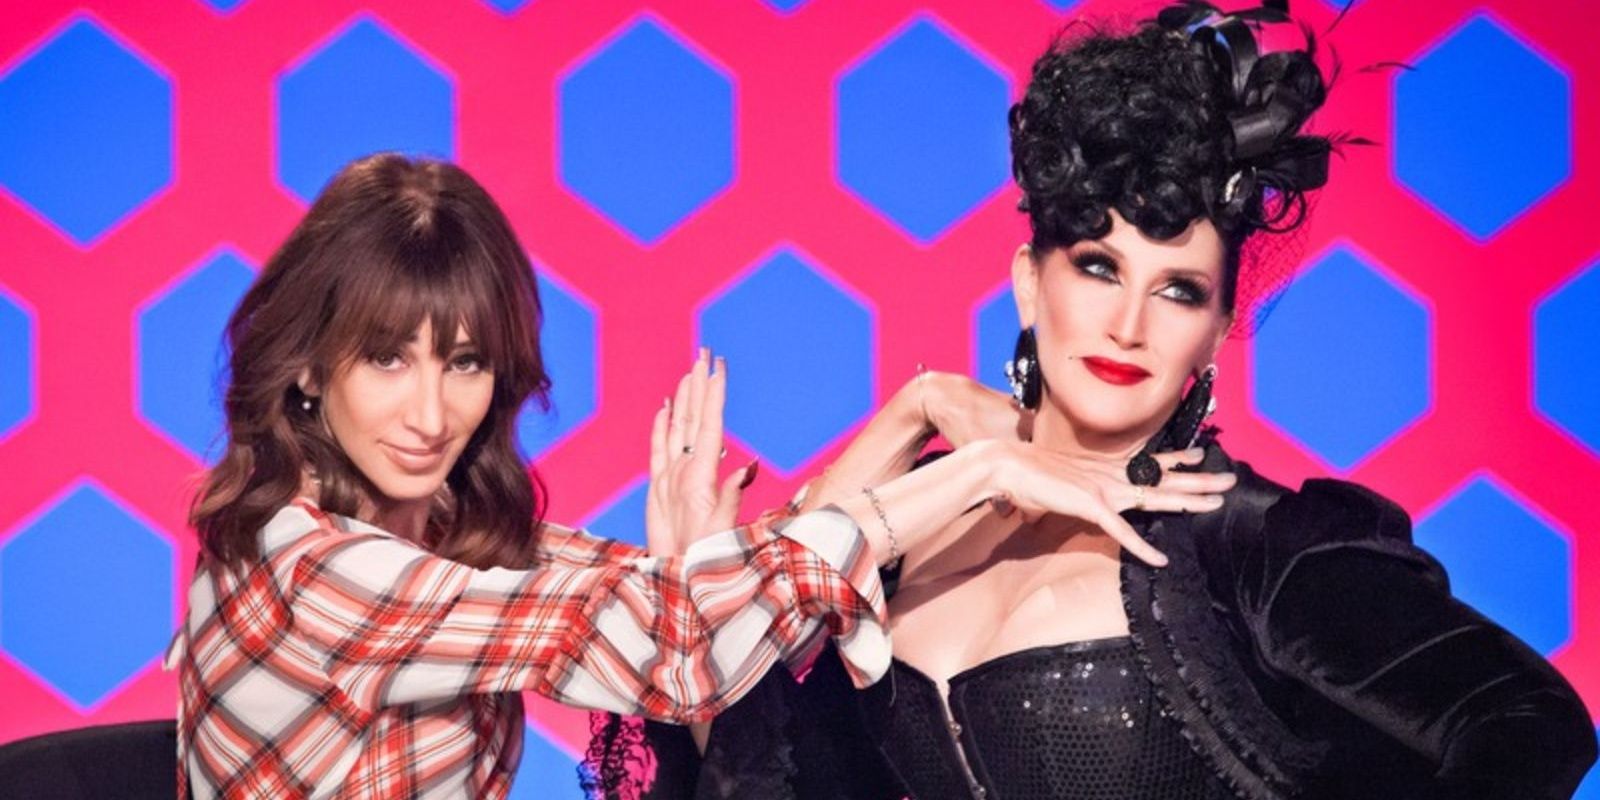 Merle Ginsberg and Michelle Visage on RuPauls Drag Race